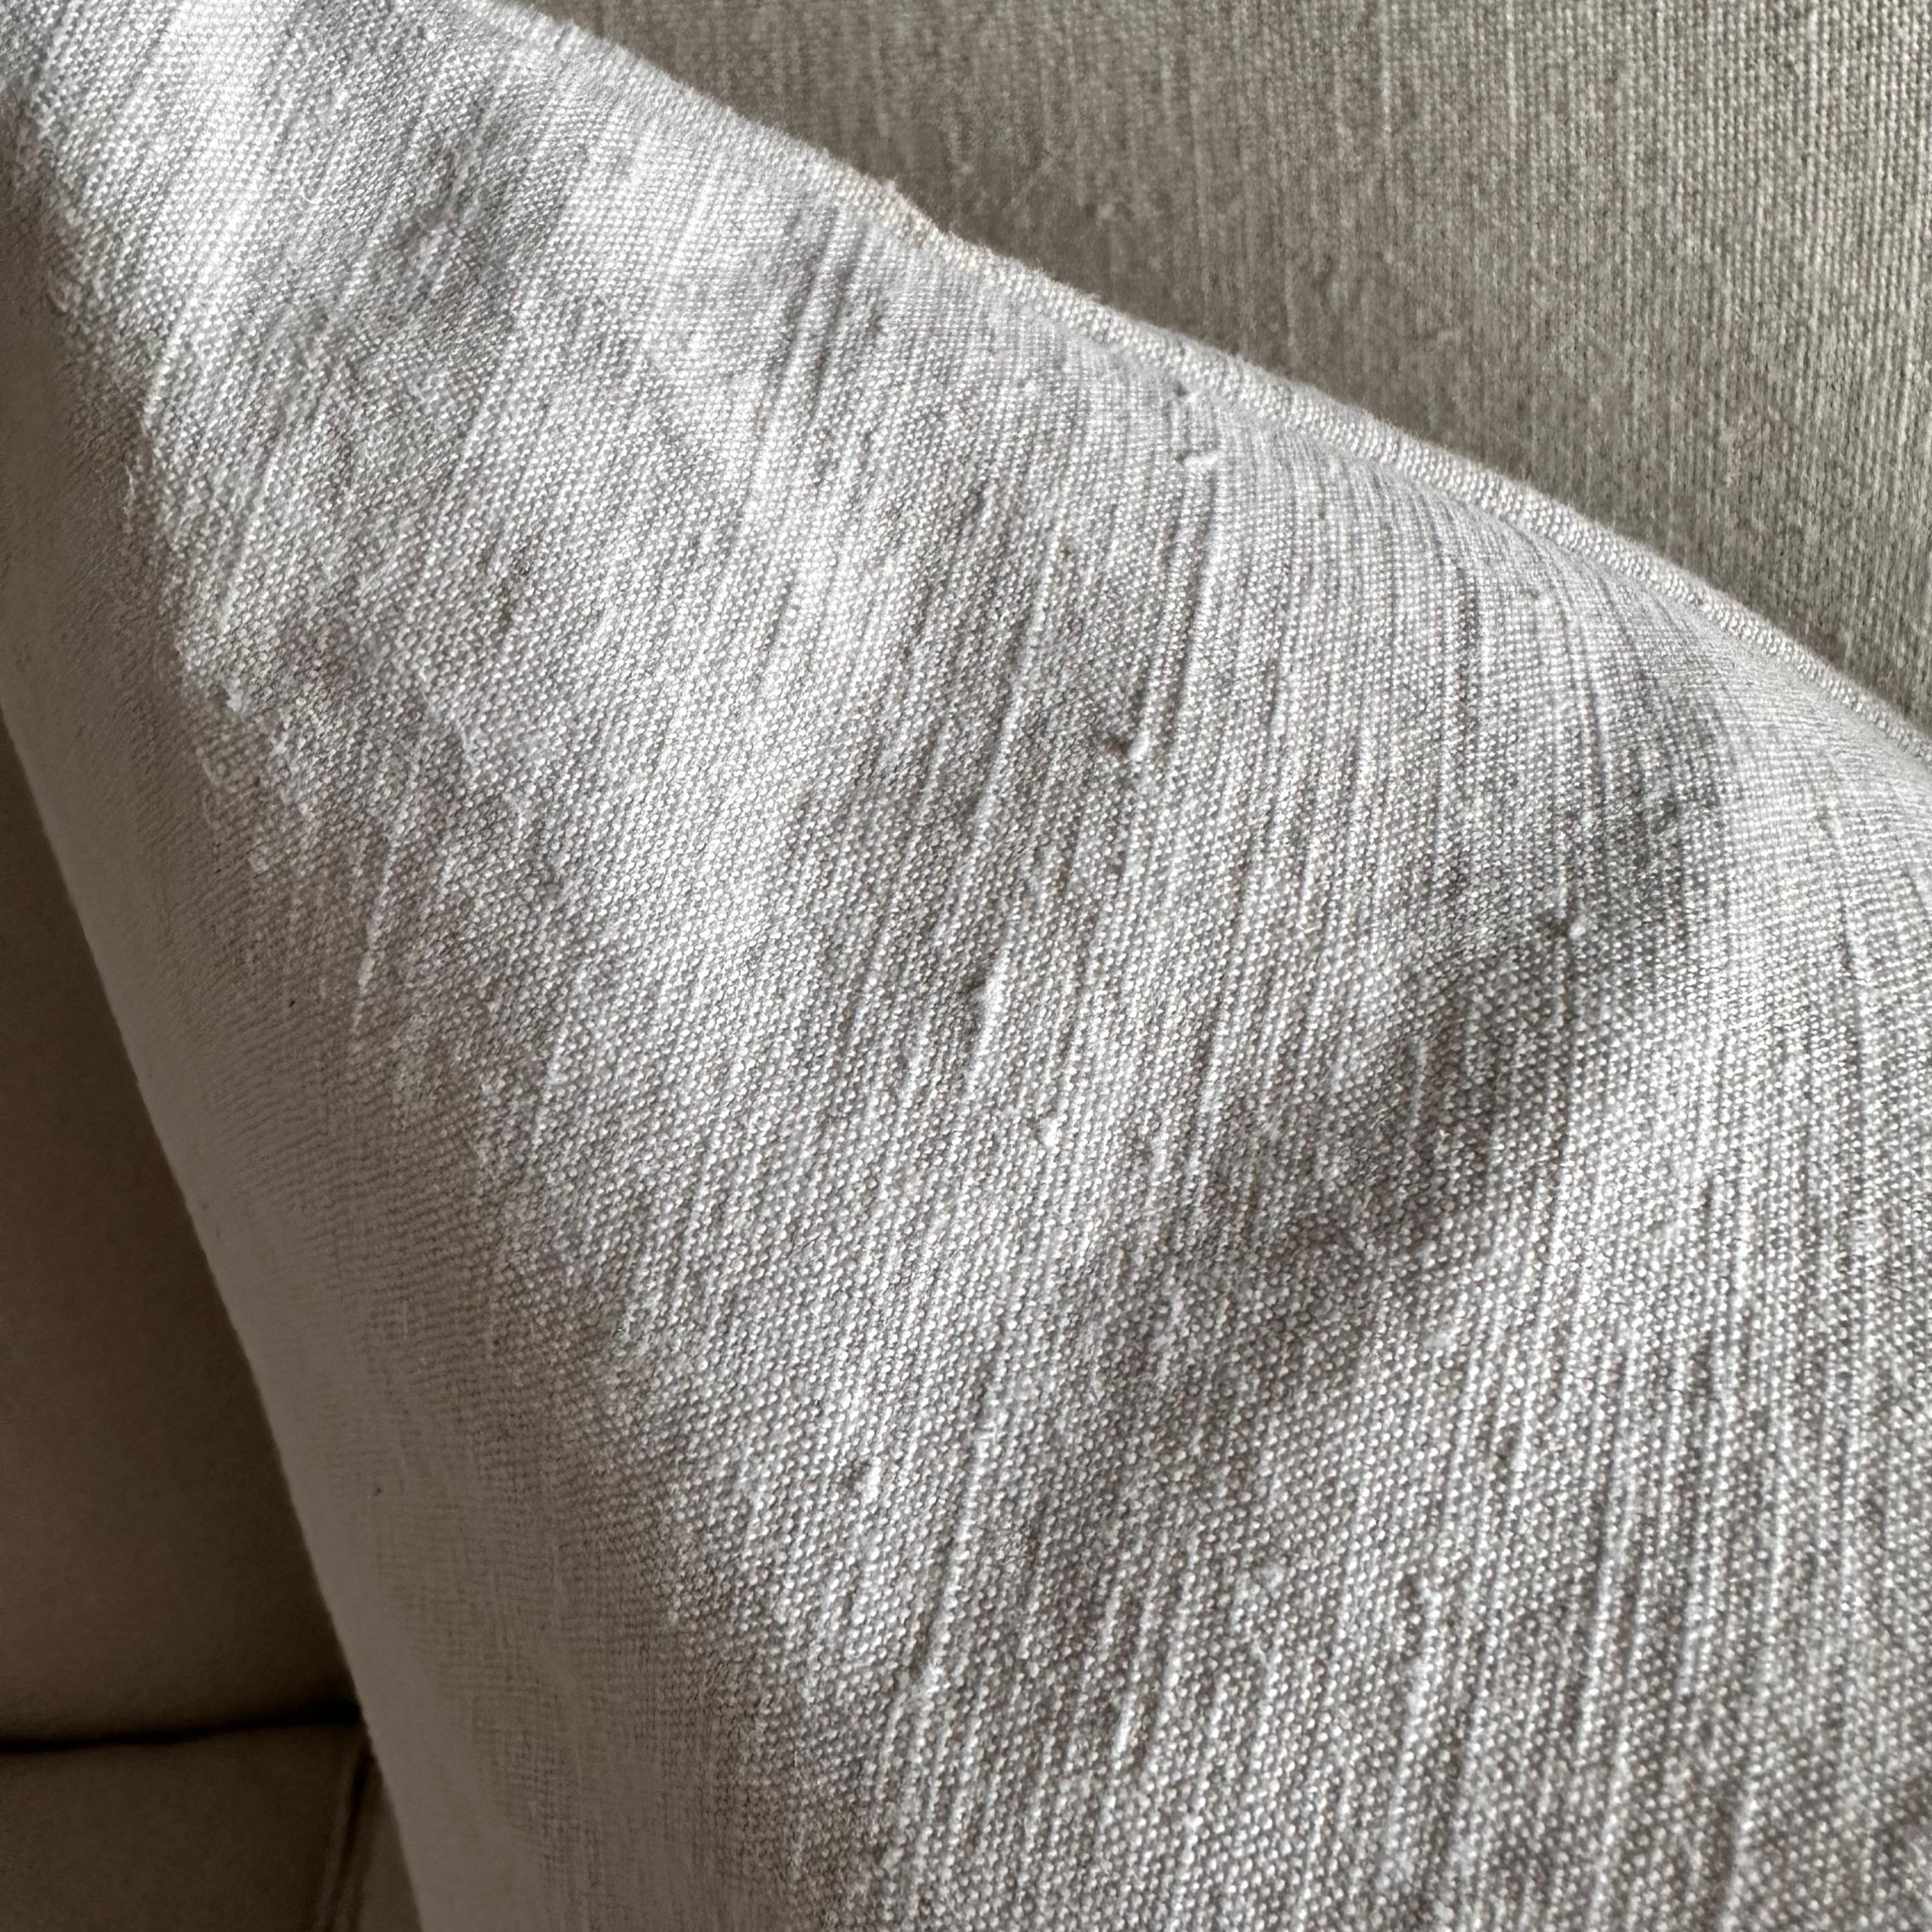 Antique French White Grain Linen Pillows with Insert In New Condition For Sale In Brea, CA